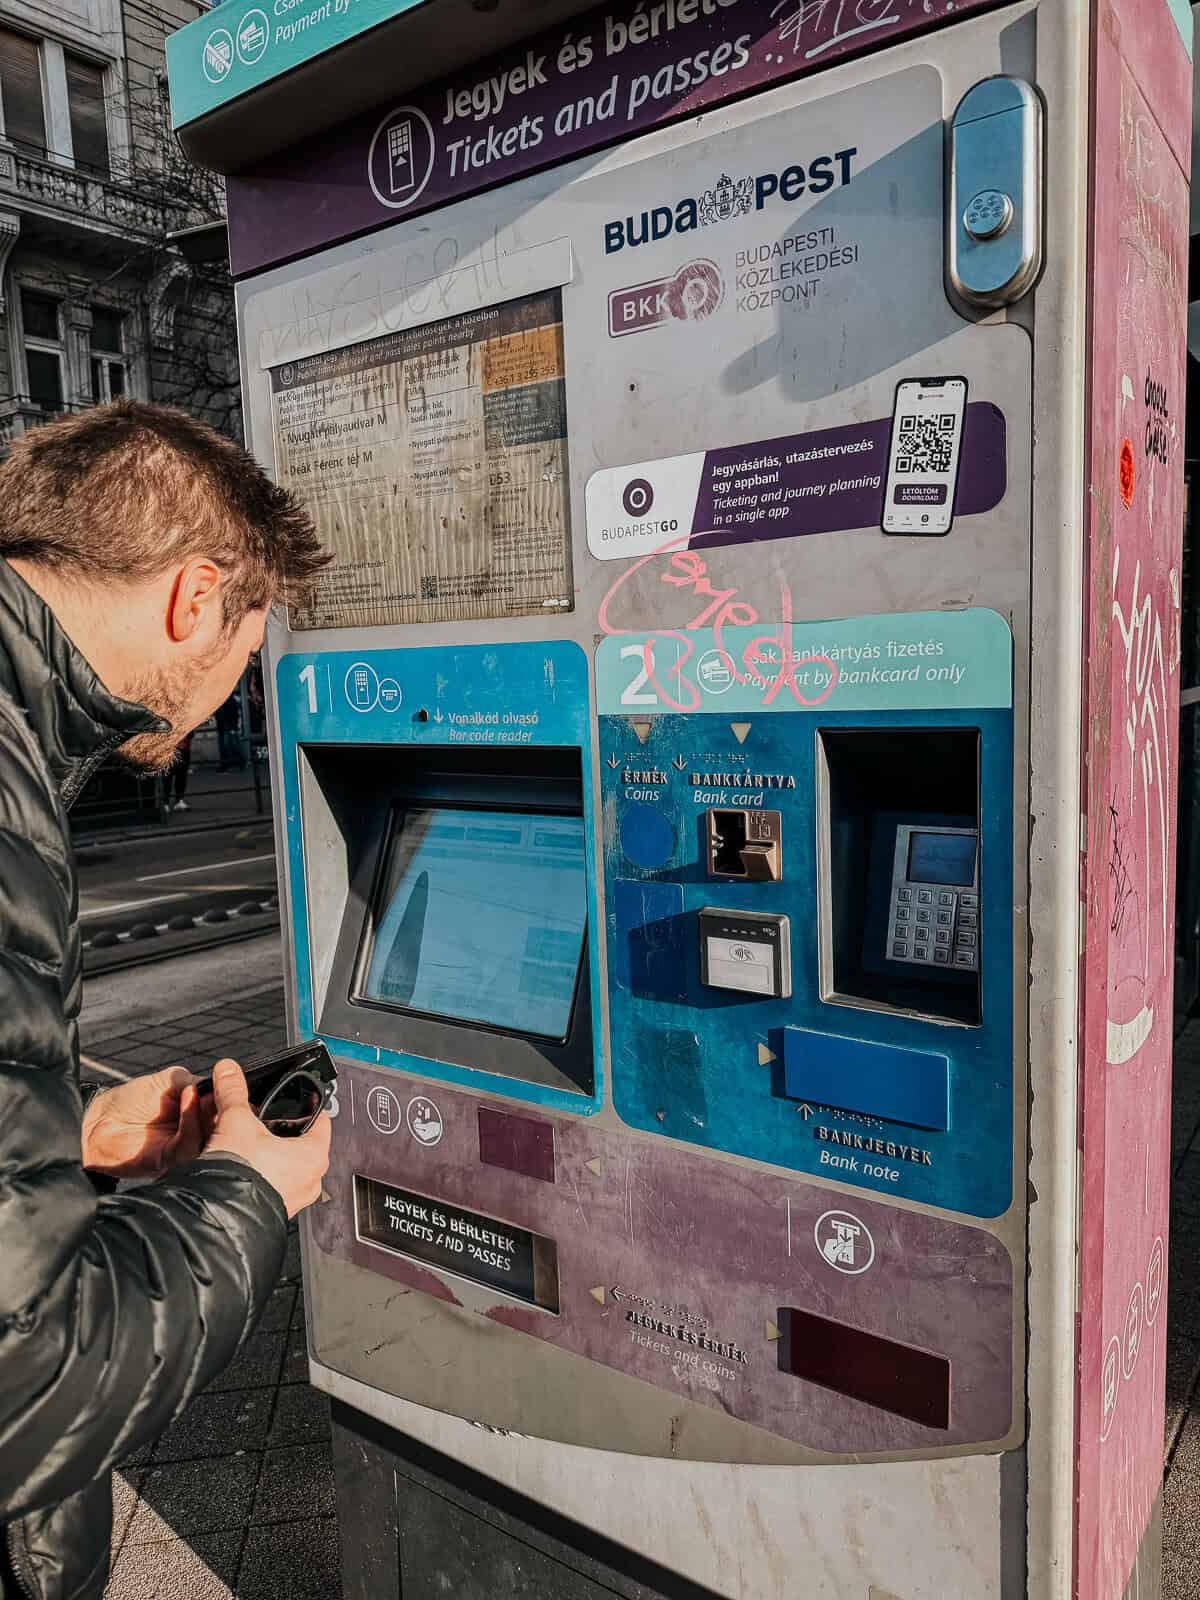 A man using a ticket machine in Budapest, with signs indicating payment options, including bank cards and coins.